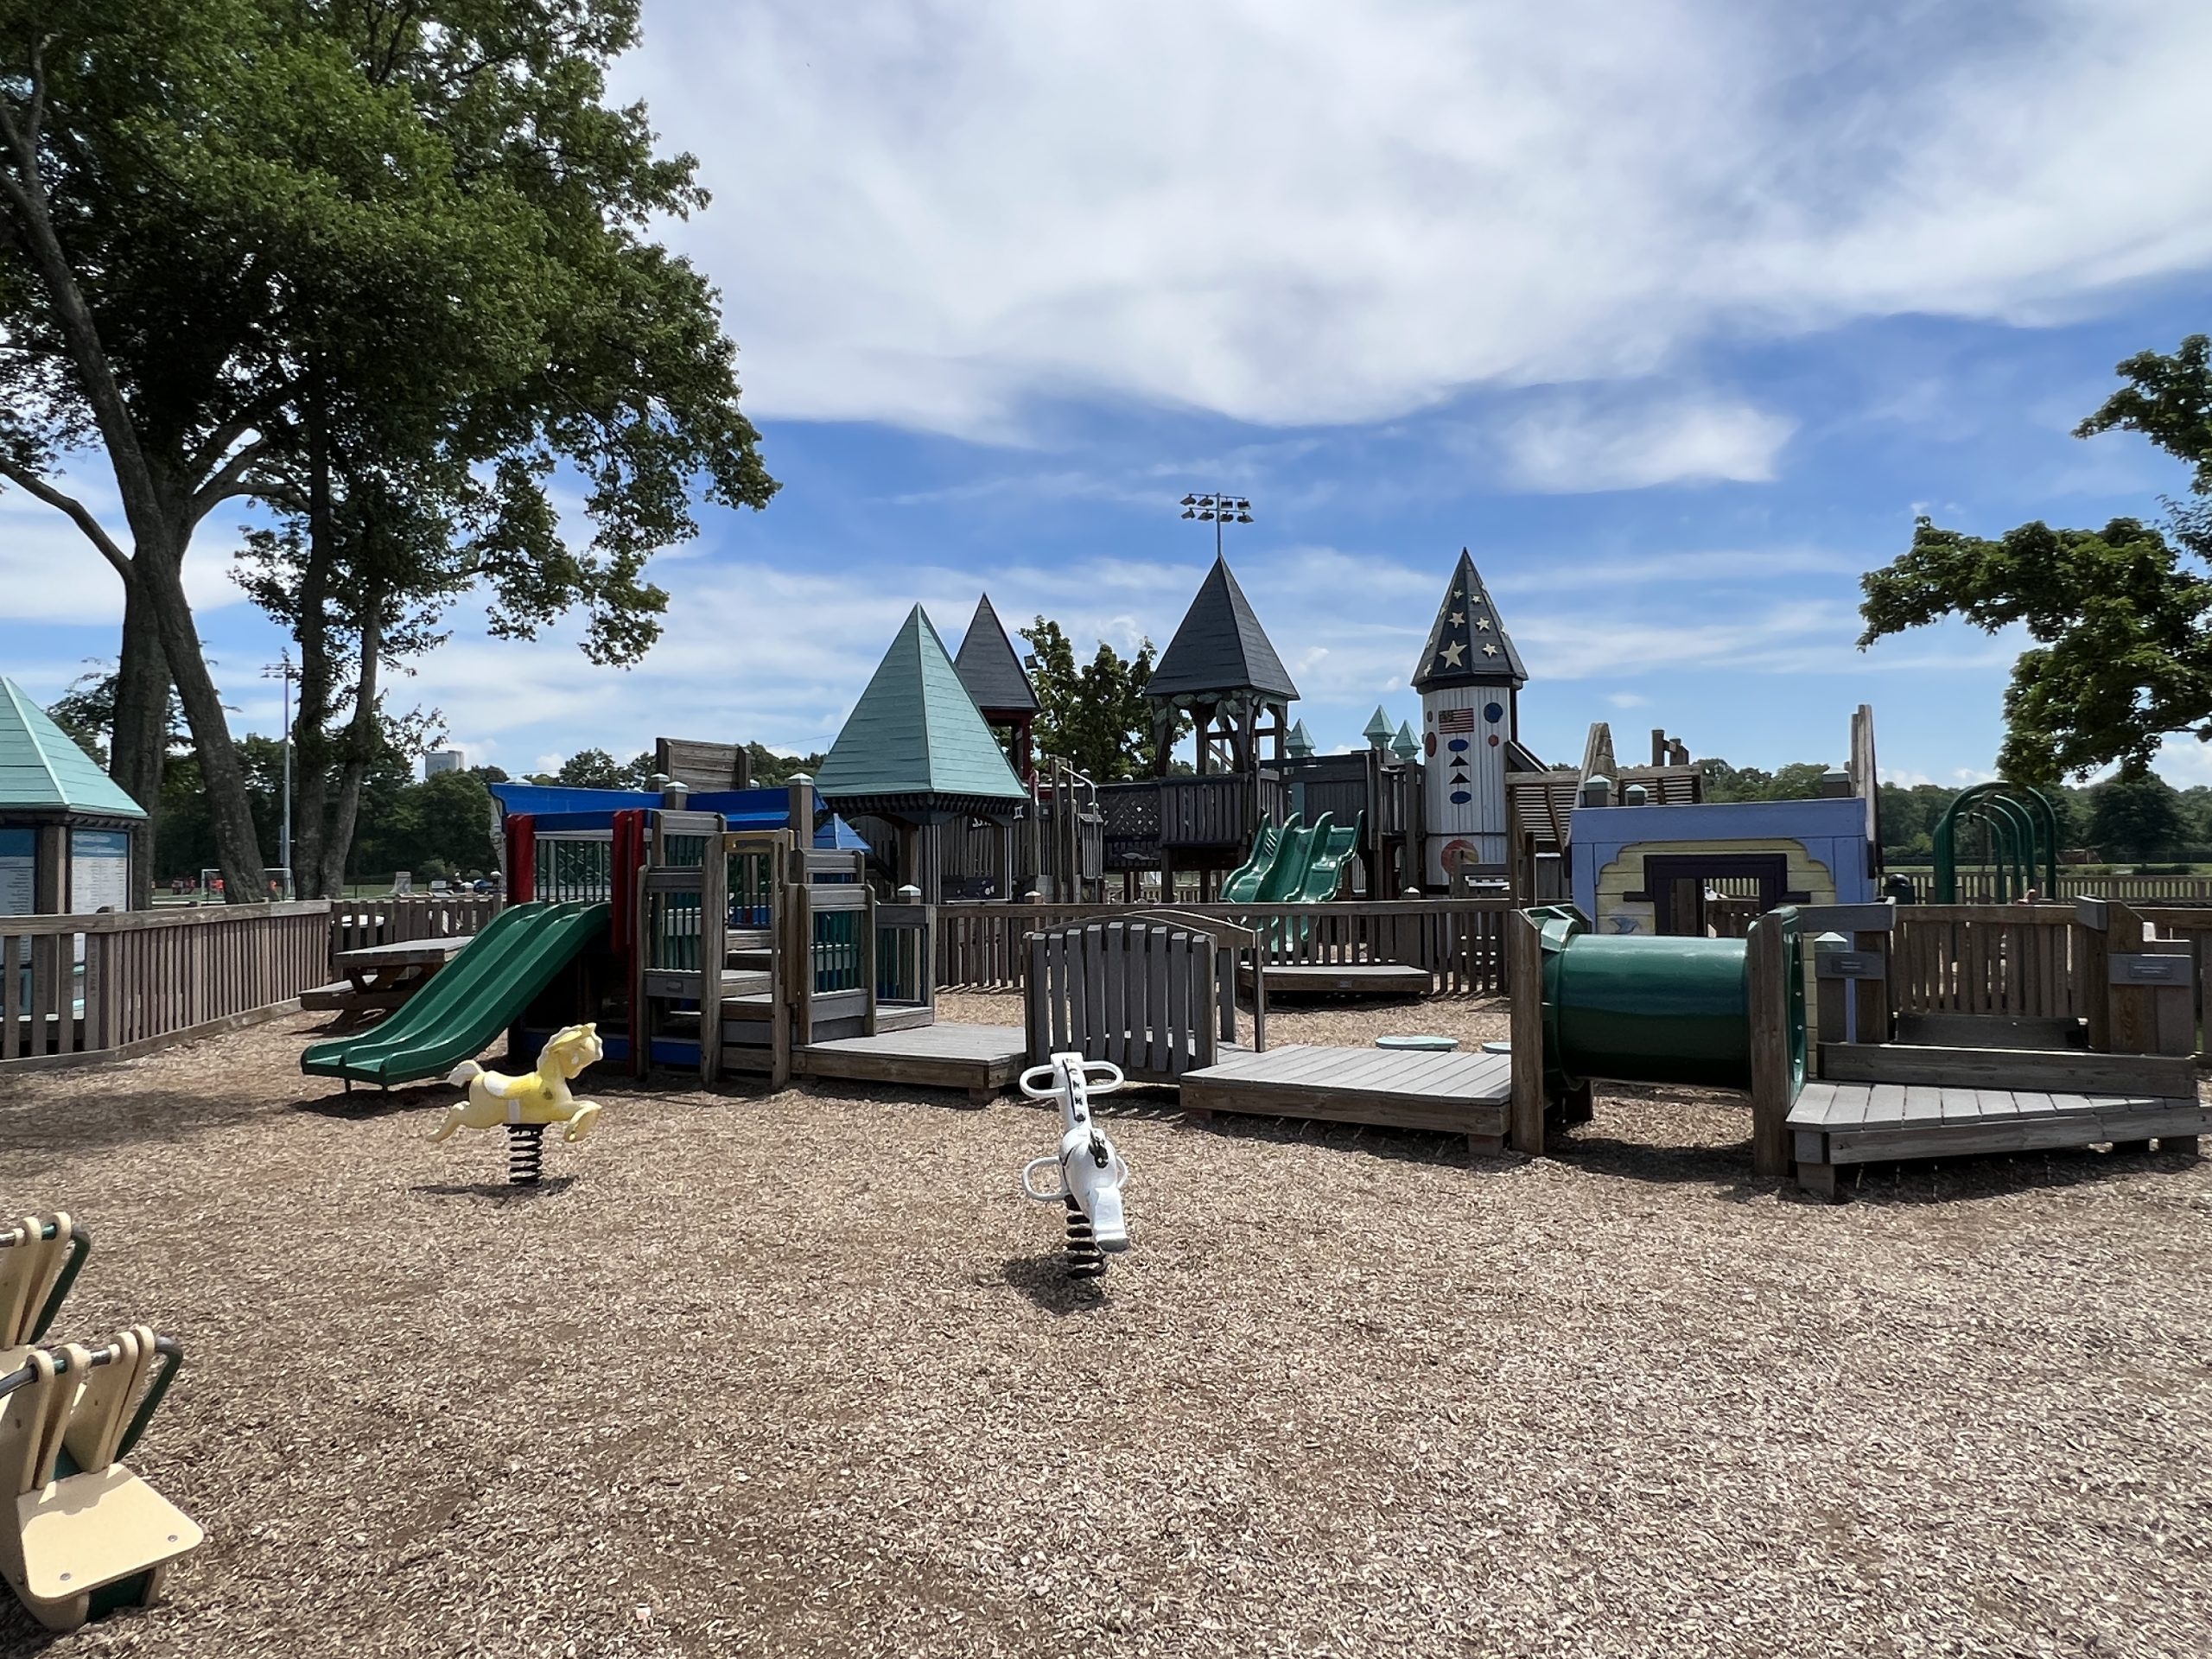 TOT LOT at Imagination Station Playground in Roxbury NJ - WIDE view with ride on toys, tunnel, bridge, and slide BEST